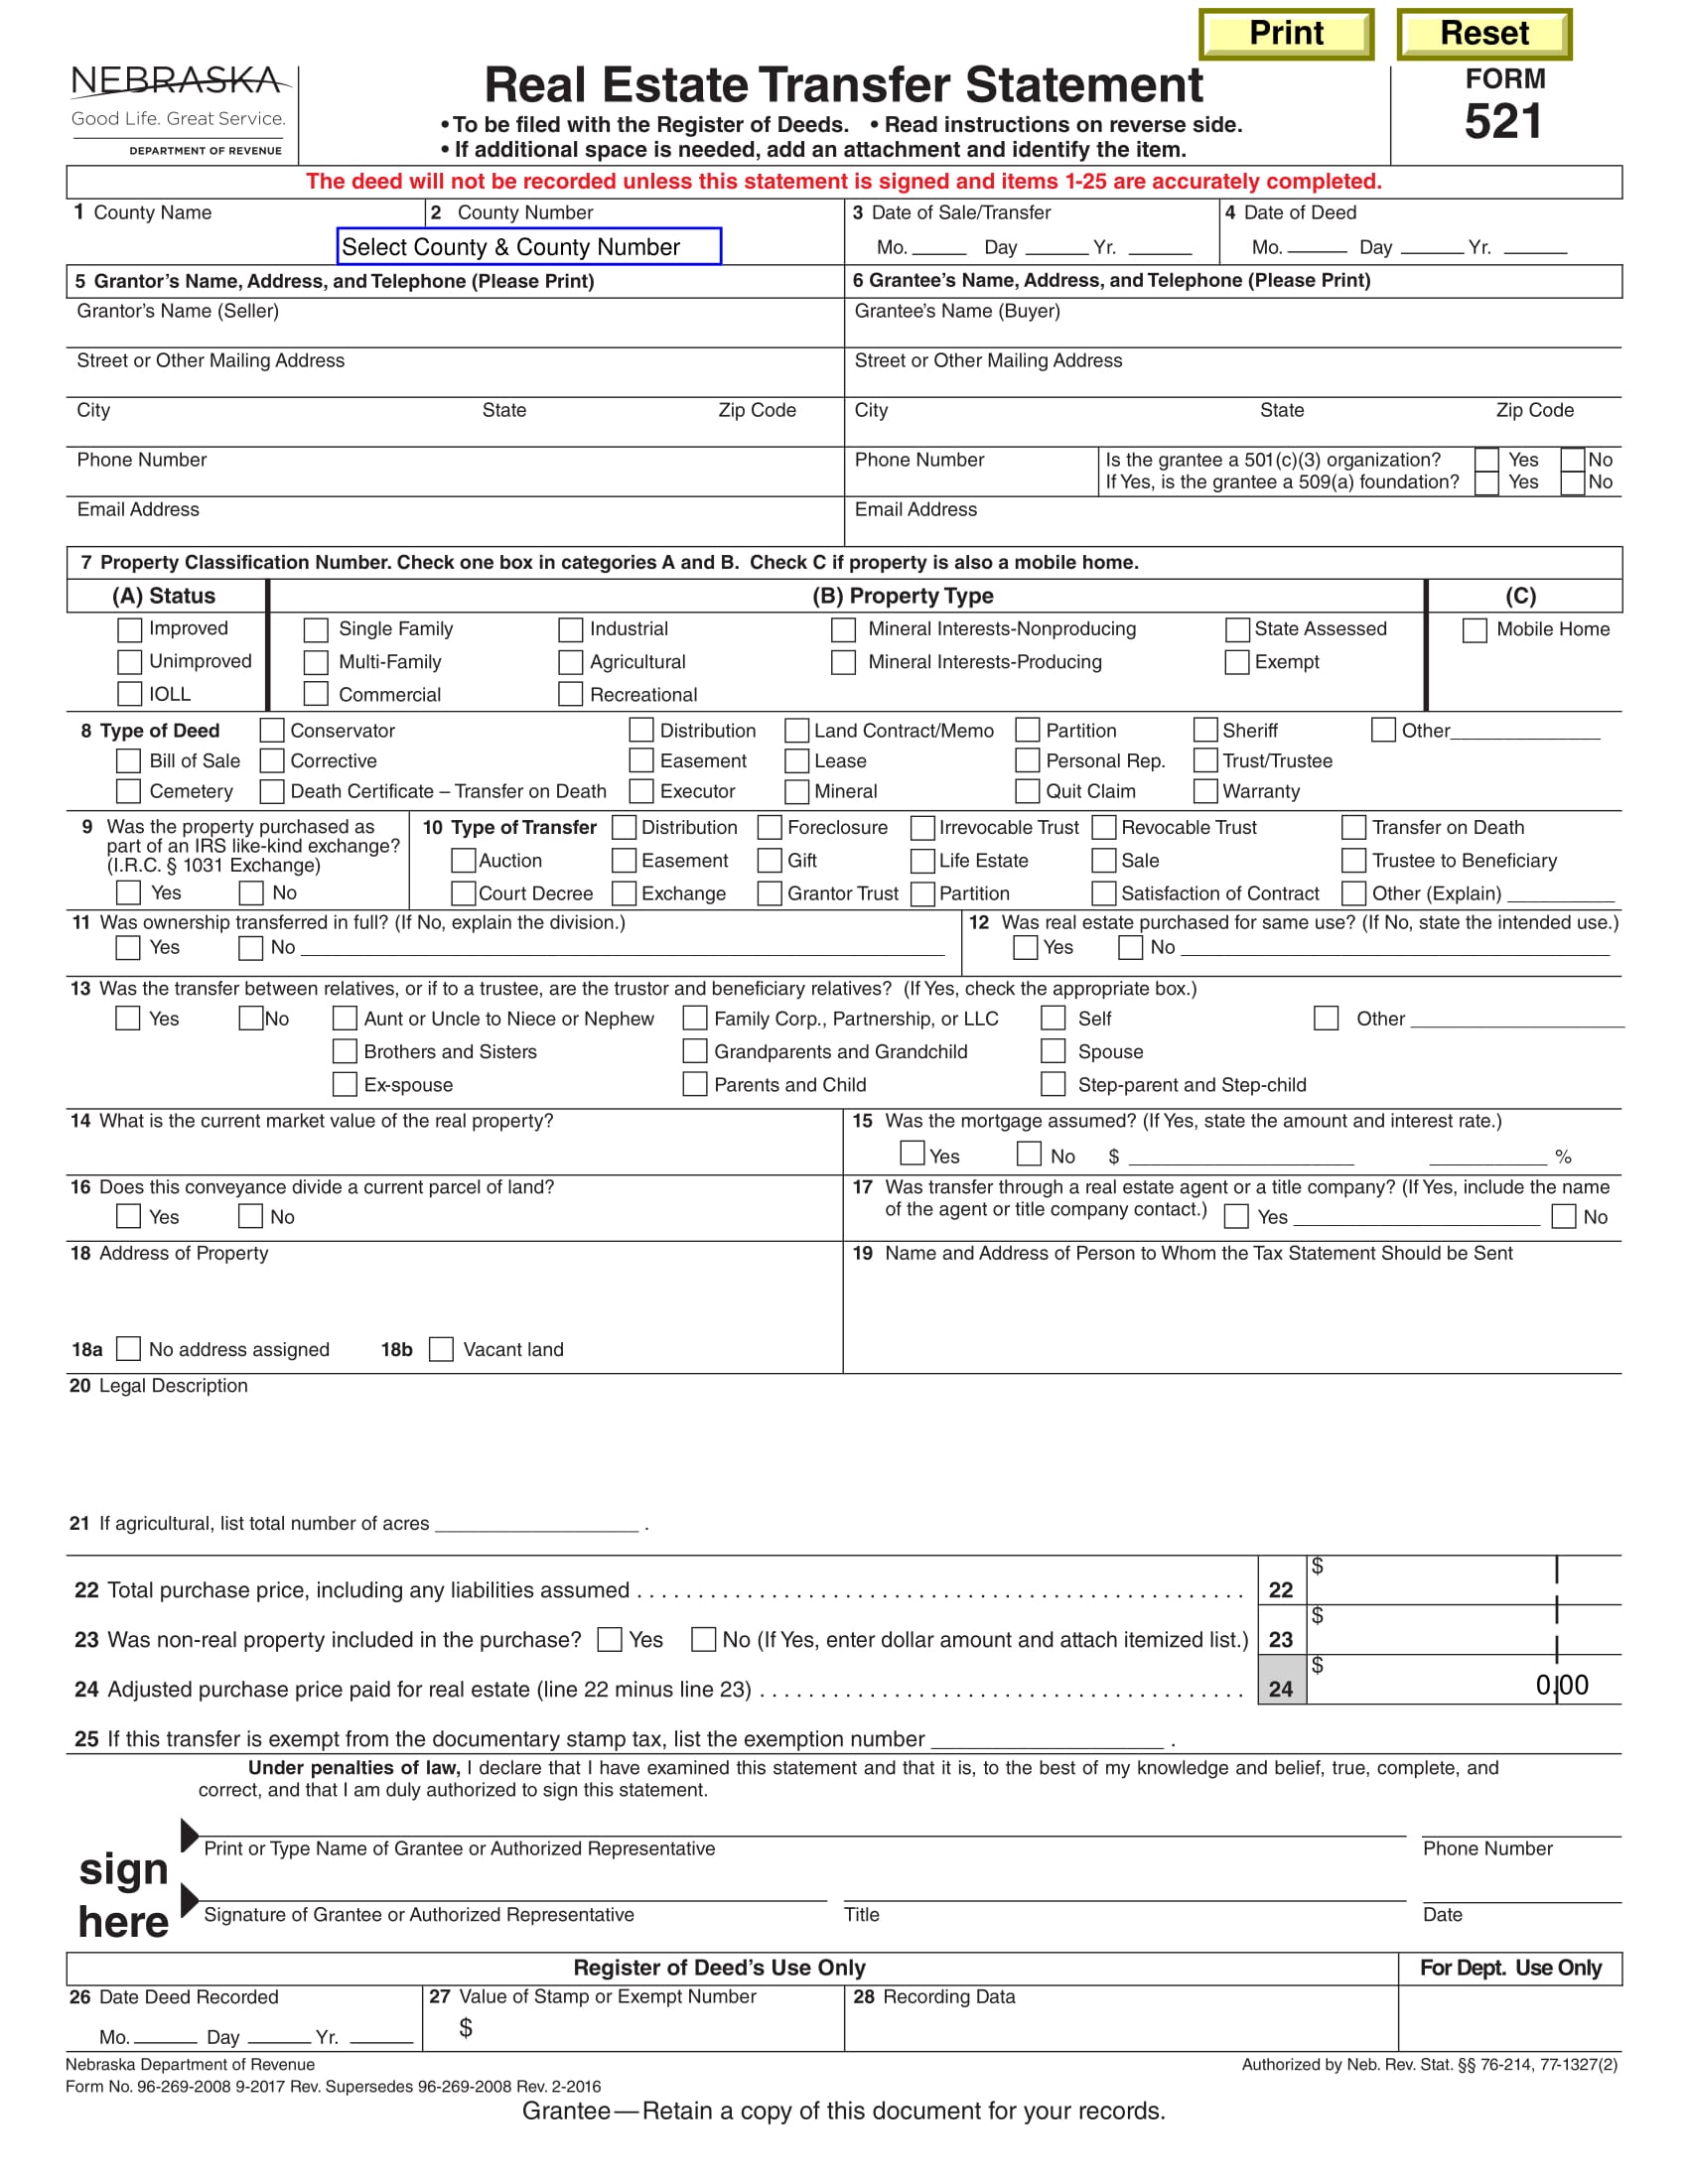 official real estate transfer statement form 1